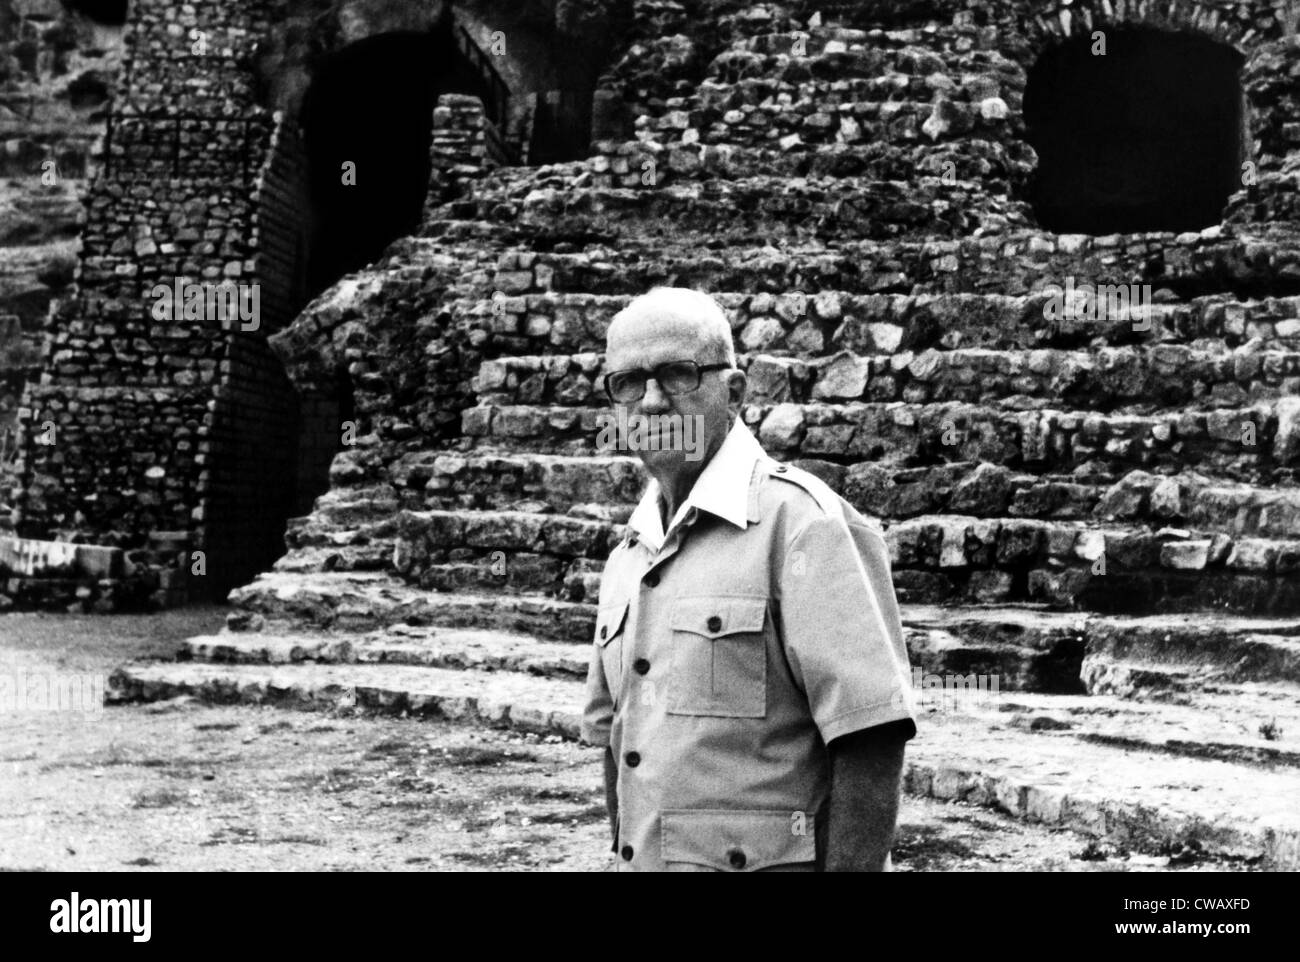 JAMES MICHENER'S WORLD James Michener ('Spain: The Land the Legend,' episode 3 aired March 21 1978) 1977-1978 Stock Photo